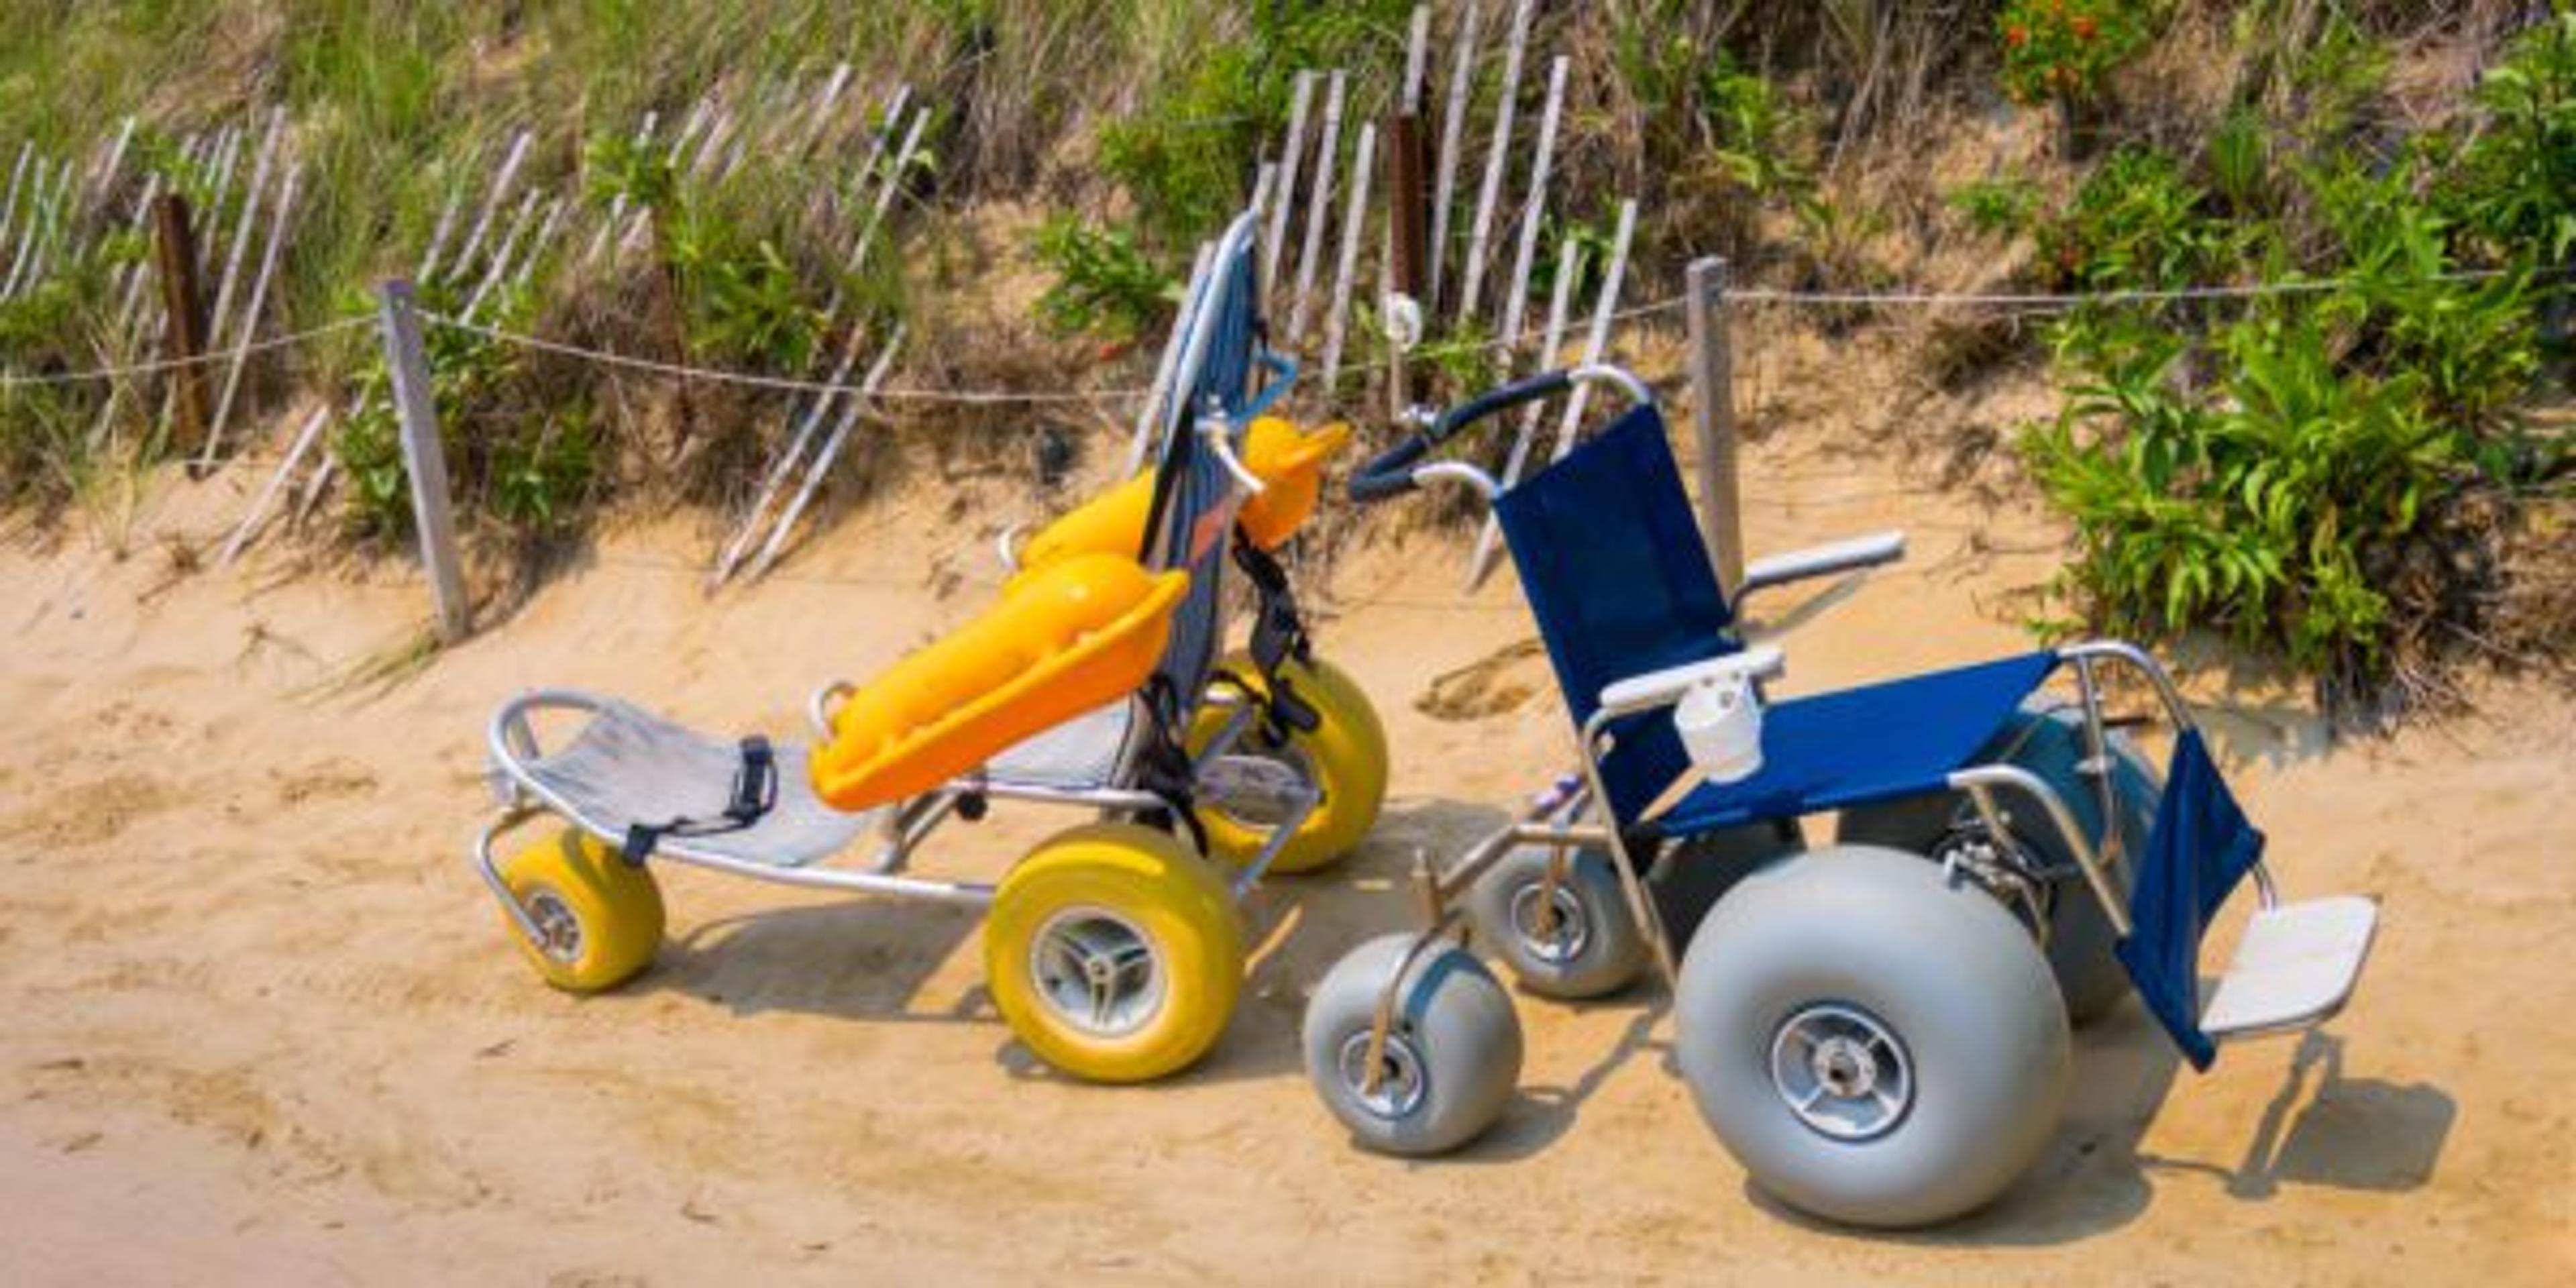 Track chairs on the beach. Beach wheelchairs help expand access to lakes.